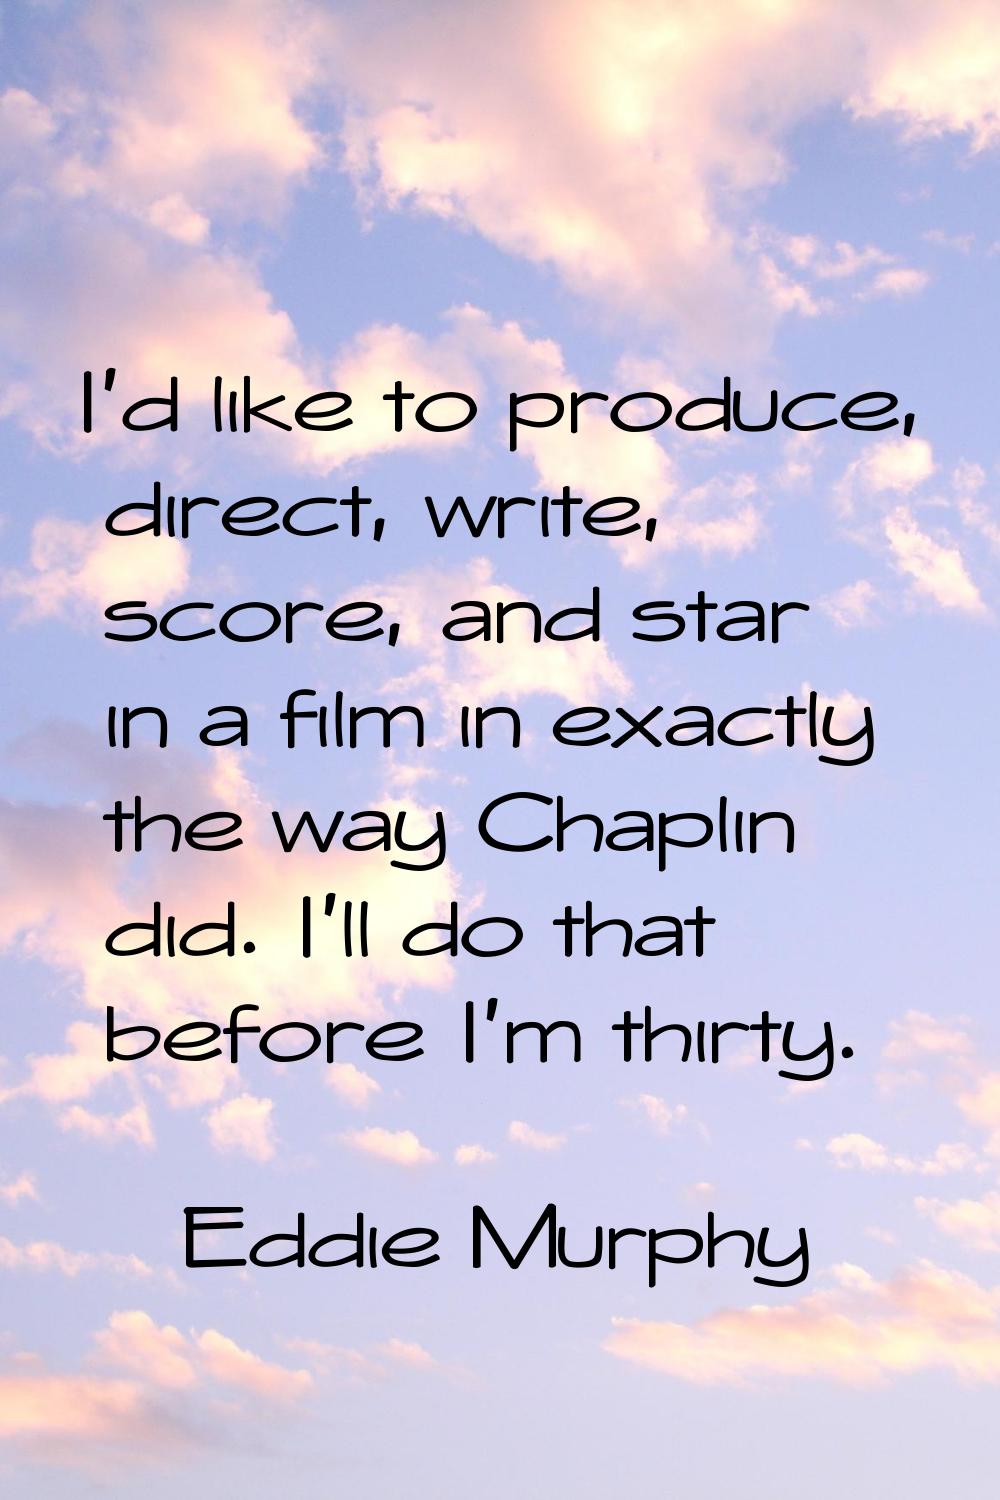 I'd like to produce, direct, write, score, and star in a film in exactly the way Chaplin did. I'll 